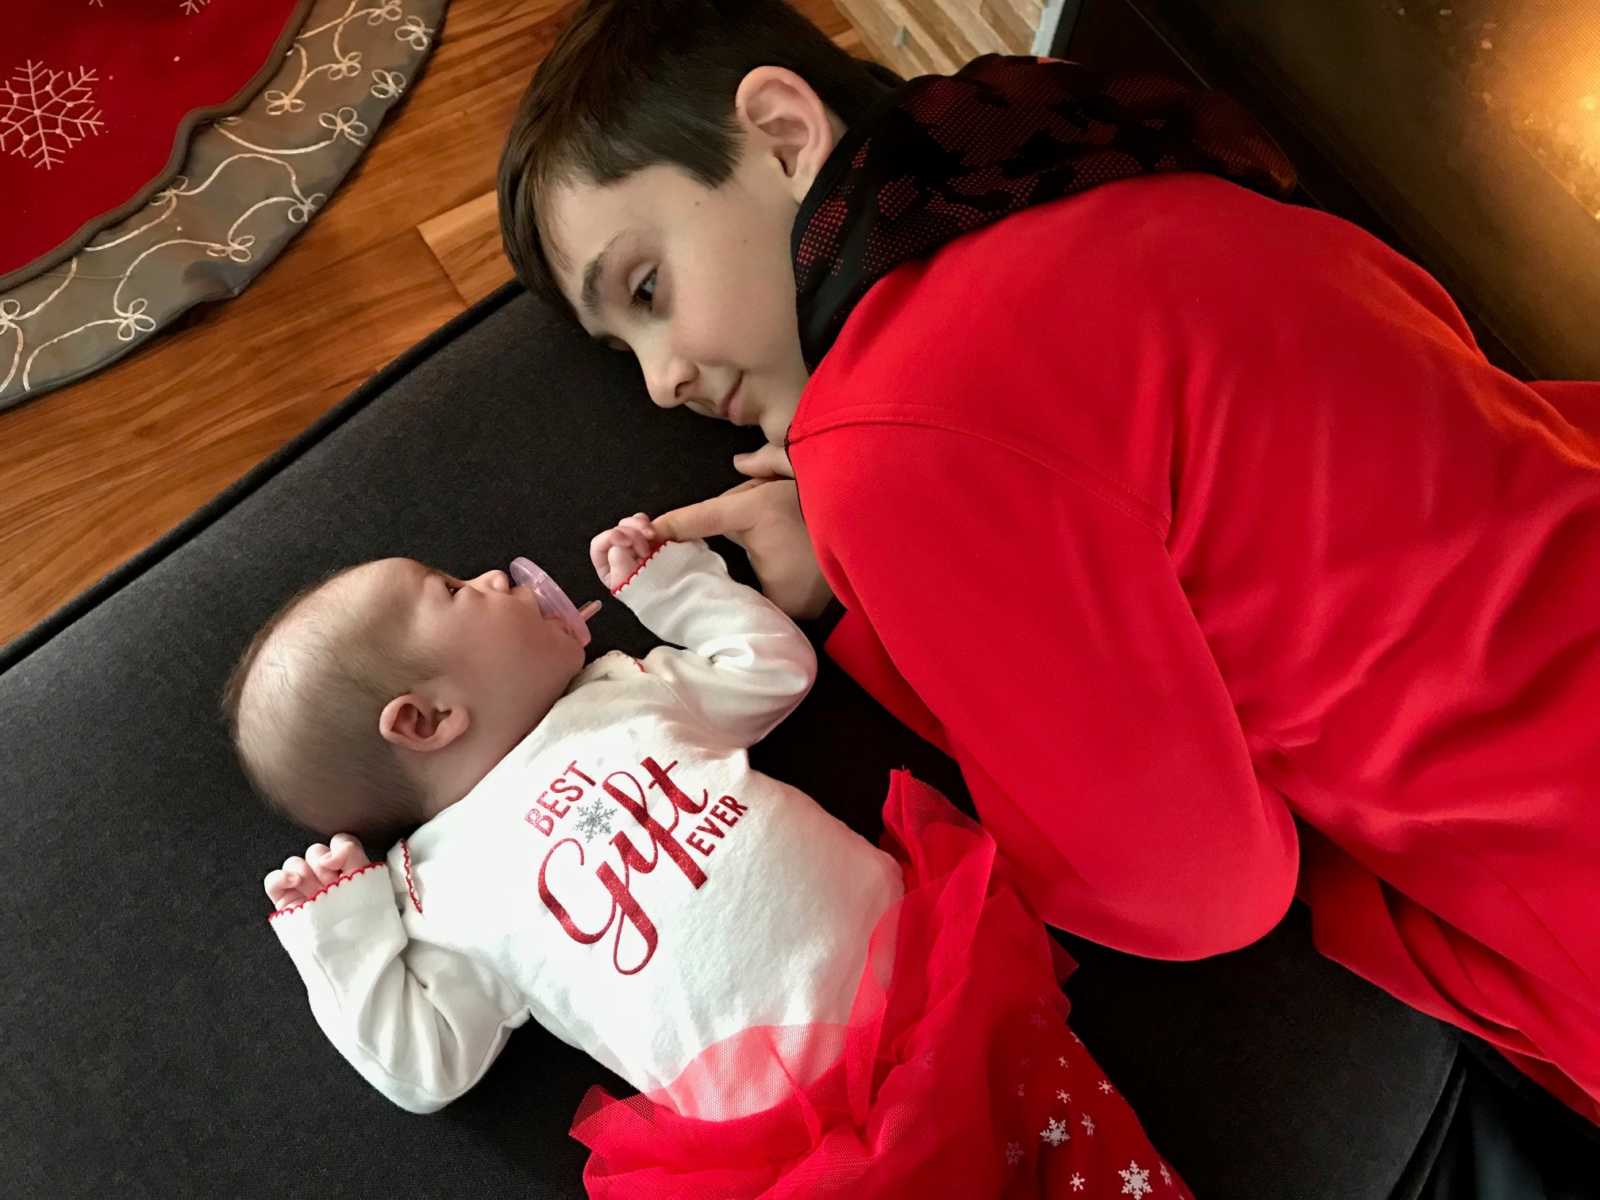 brother lays on the floor and holds hands with adopted baby sister with shirt that says, "best gift ever"